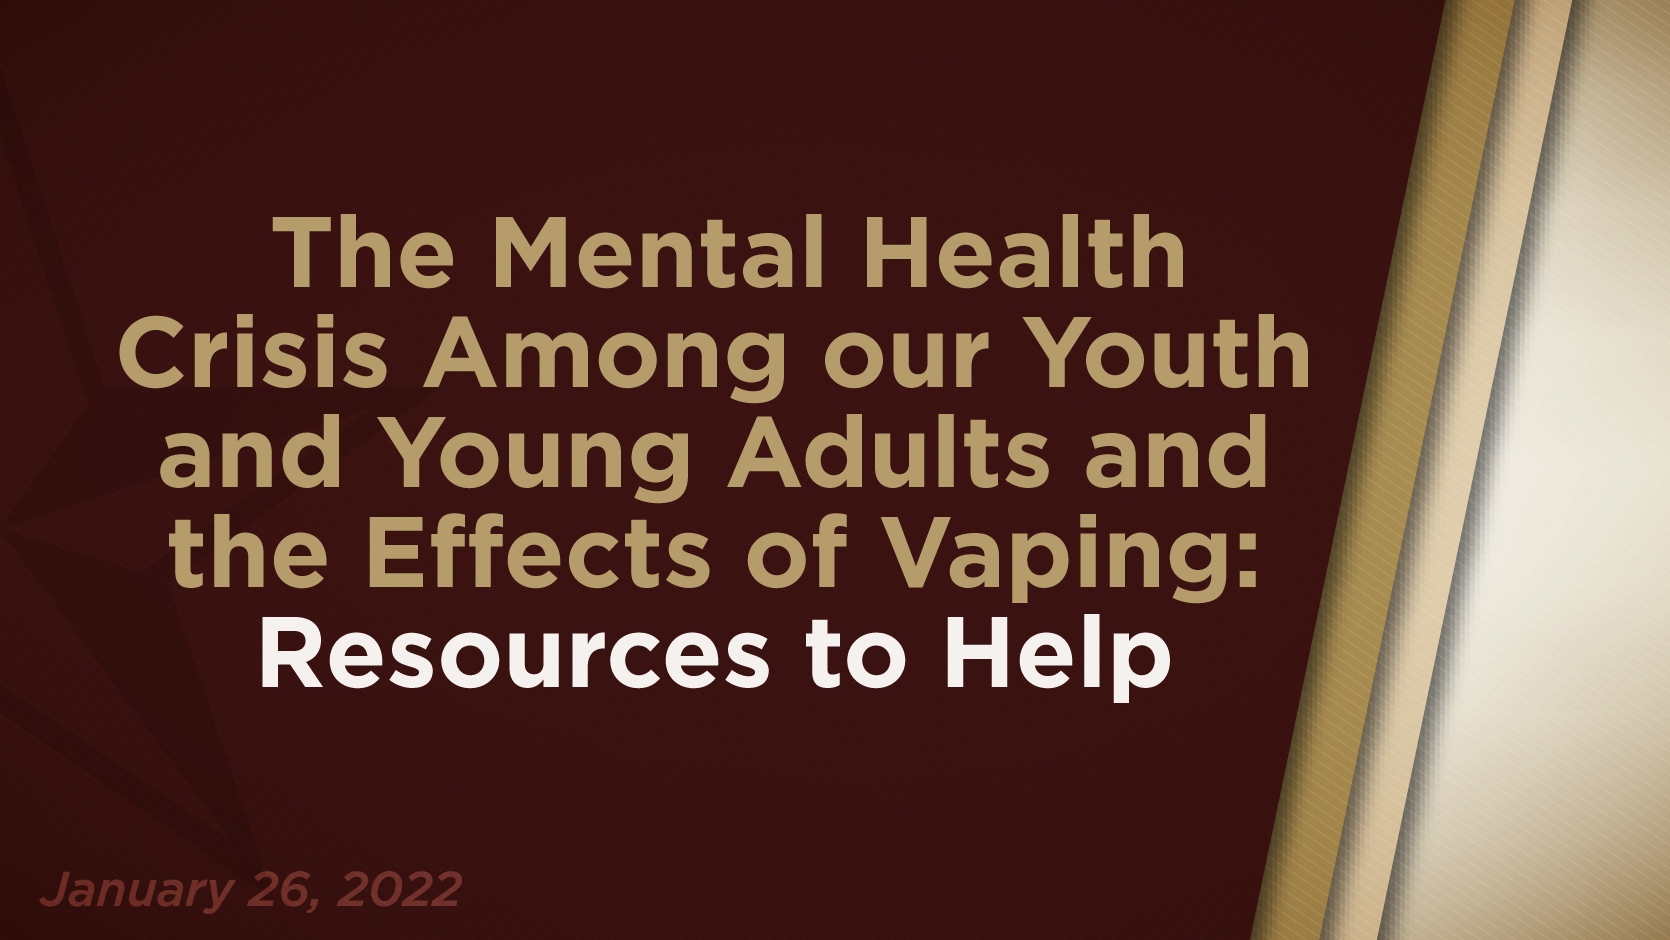 The Mental Health Crisis Among our Youth and Young Adults and the Effects of Vaping: Resources to Help